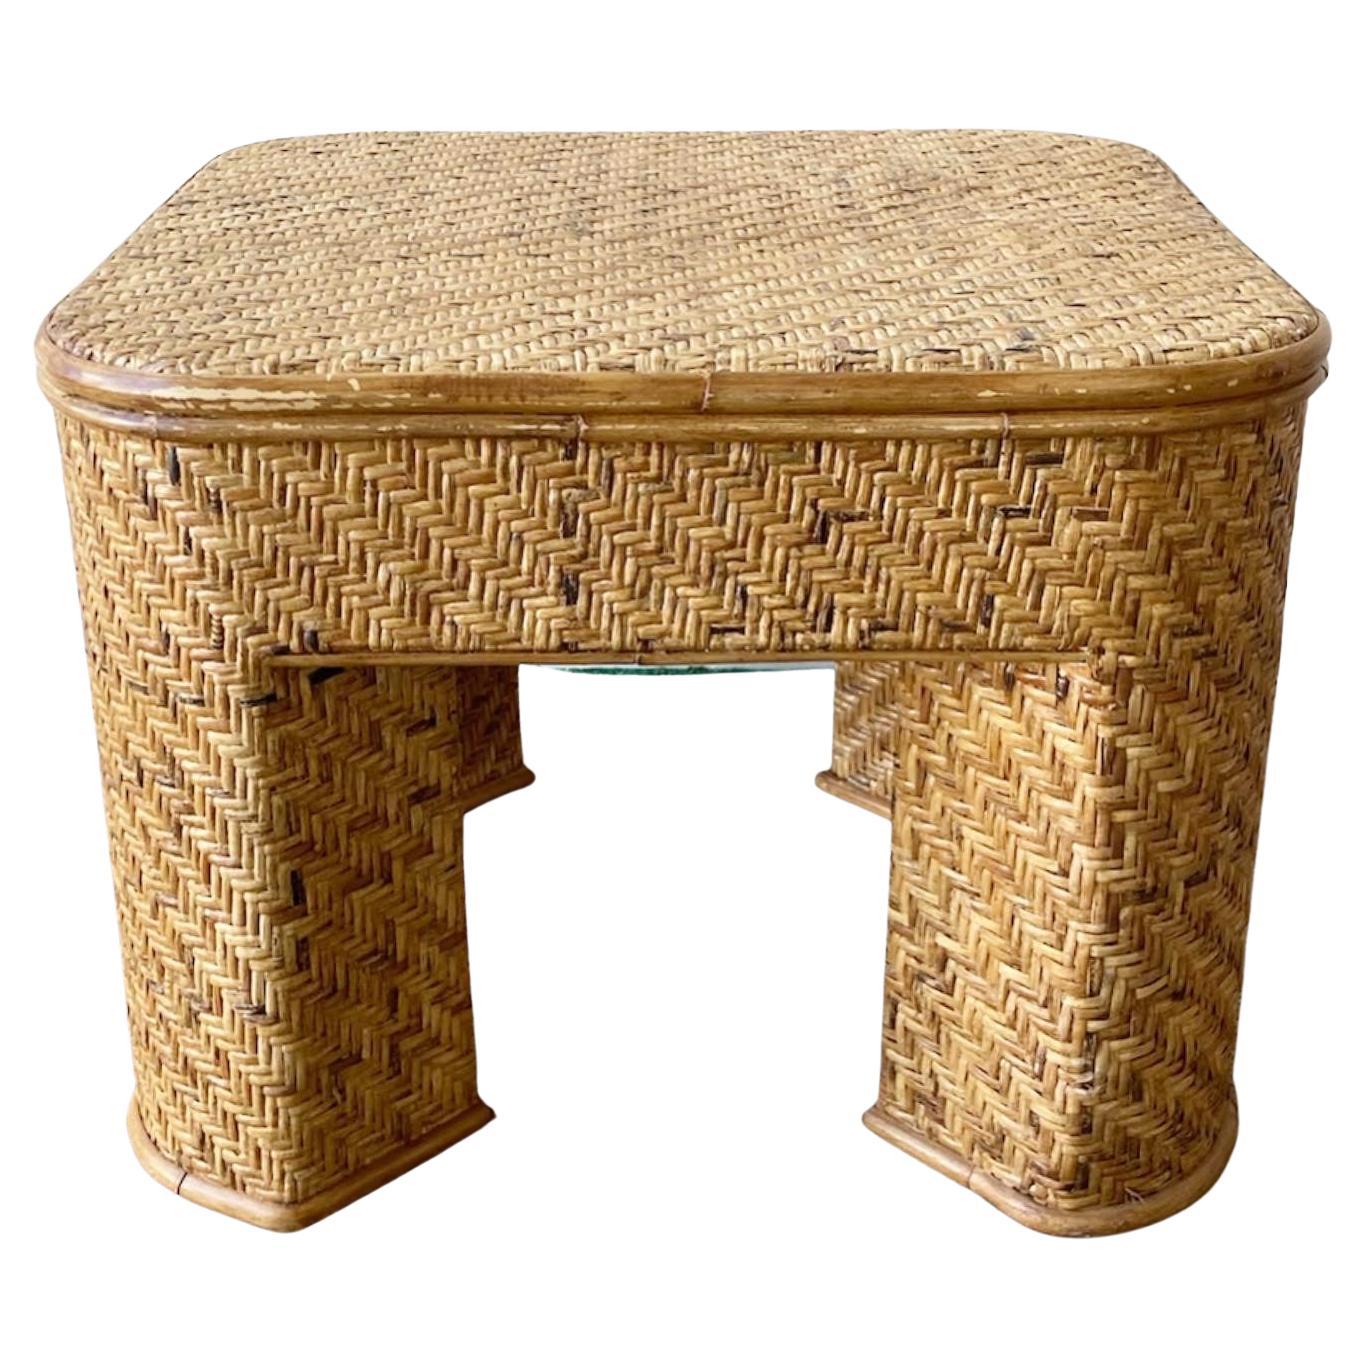 Bohemian Square Wicker Wrapped Coffee Table